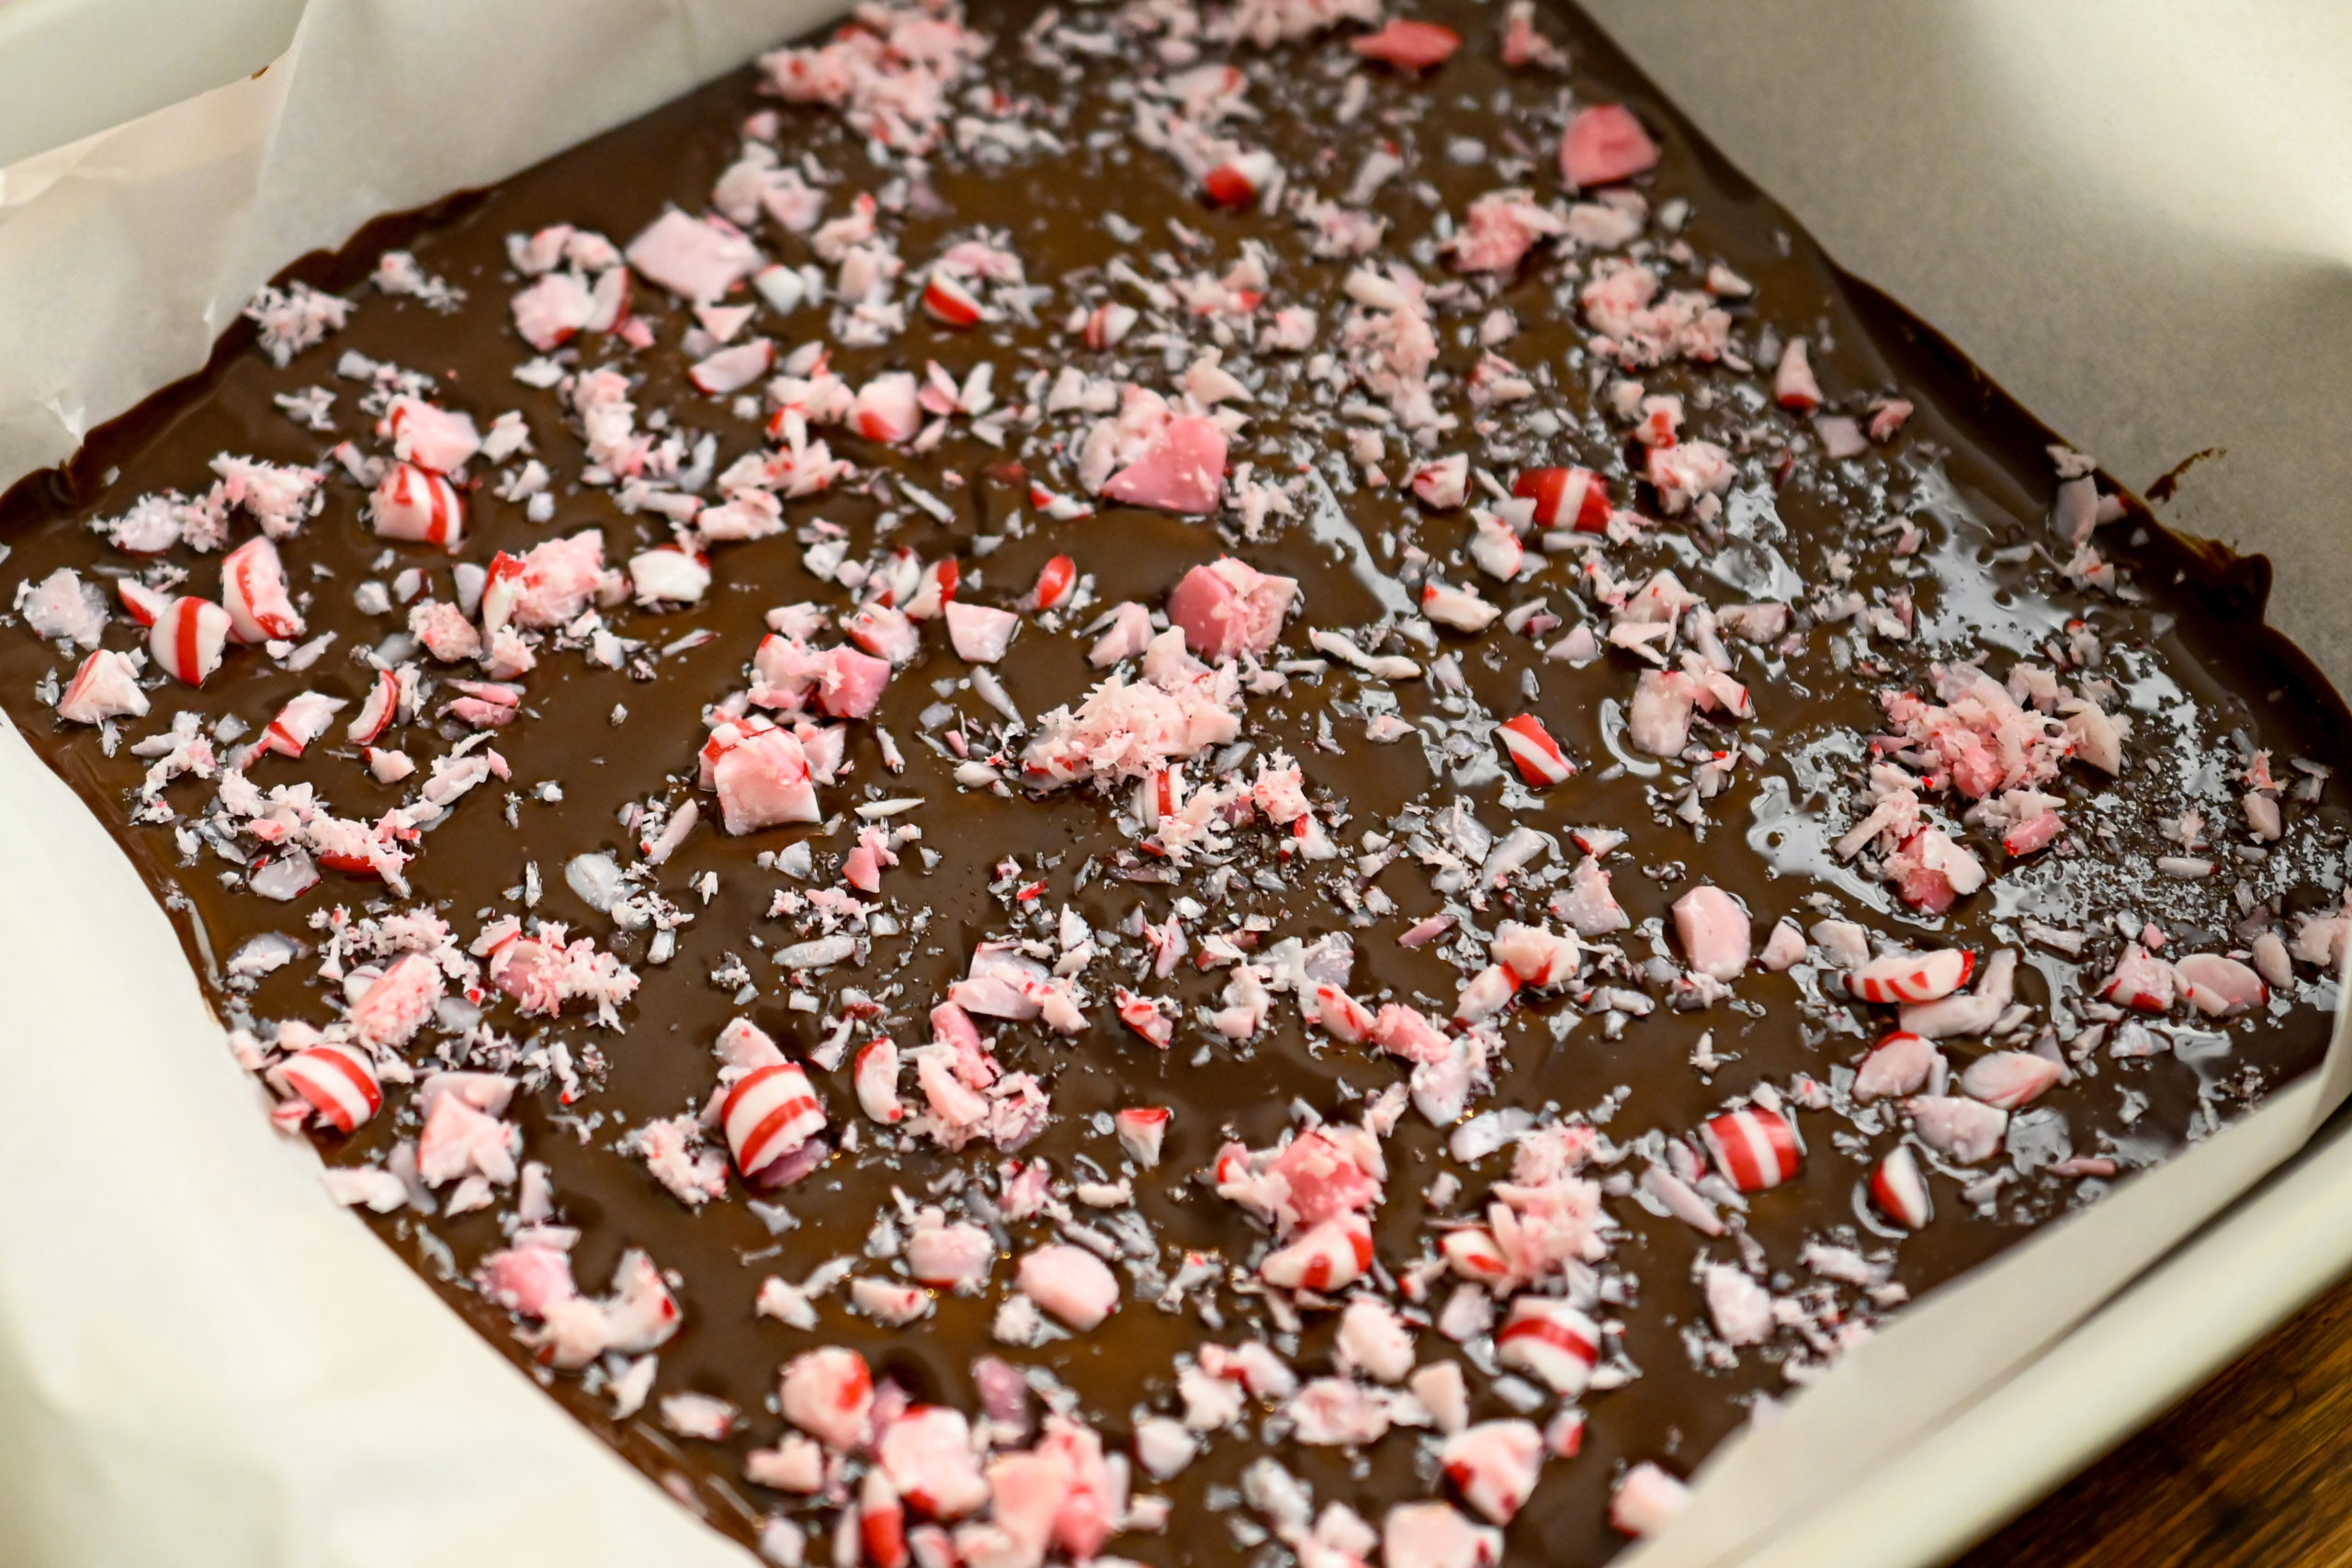 keto chocolate bark ready to be chilled